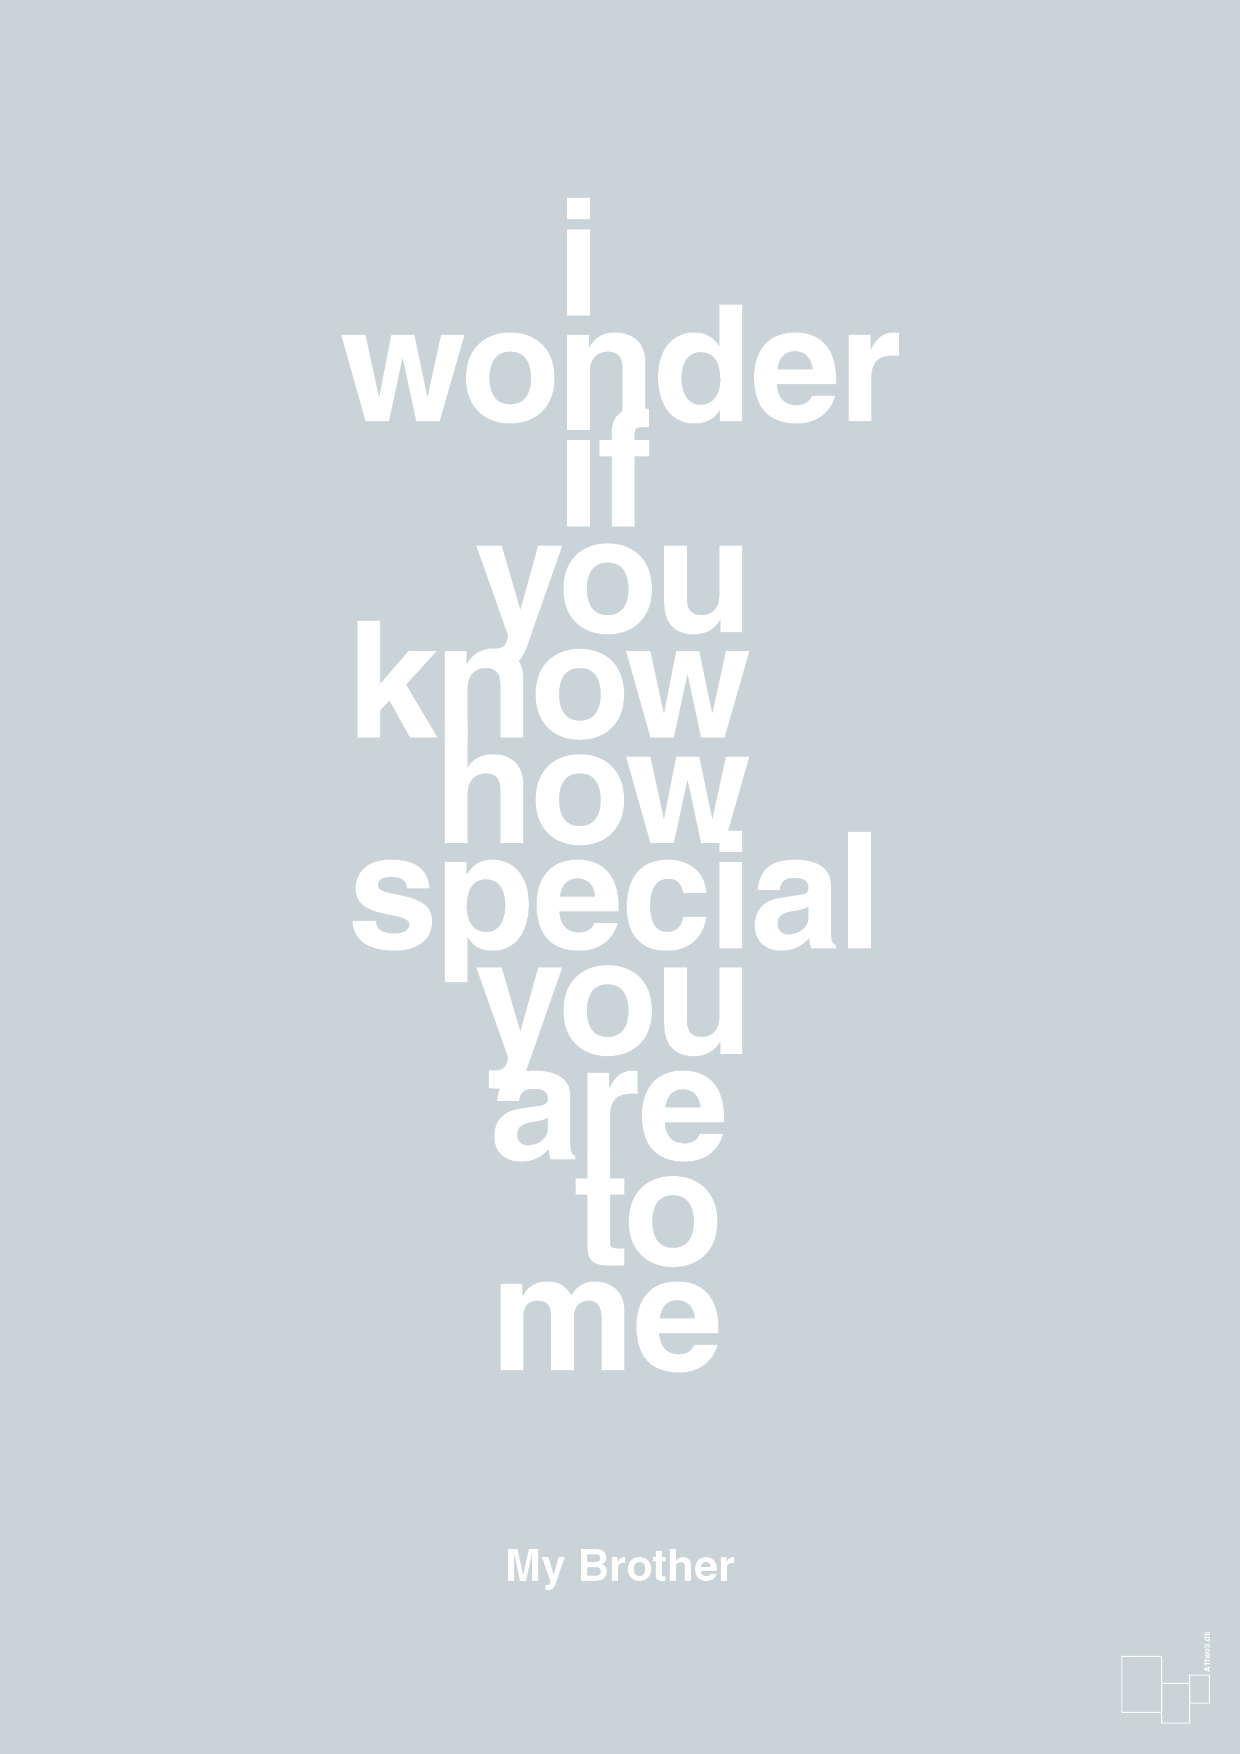 my brother - i wonder if you know how special you are to me - Plakat med Citater i Light Drizzle